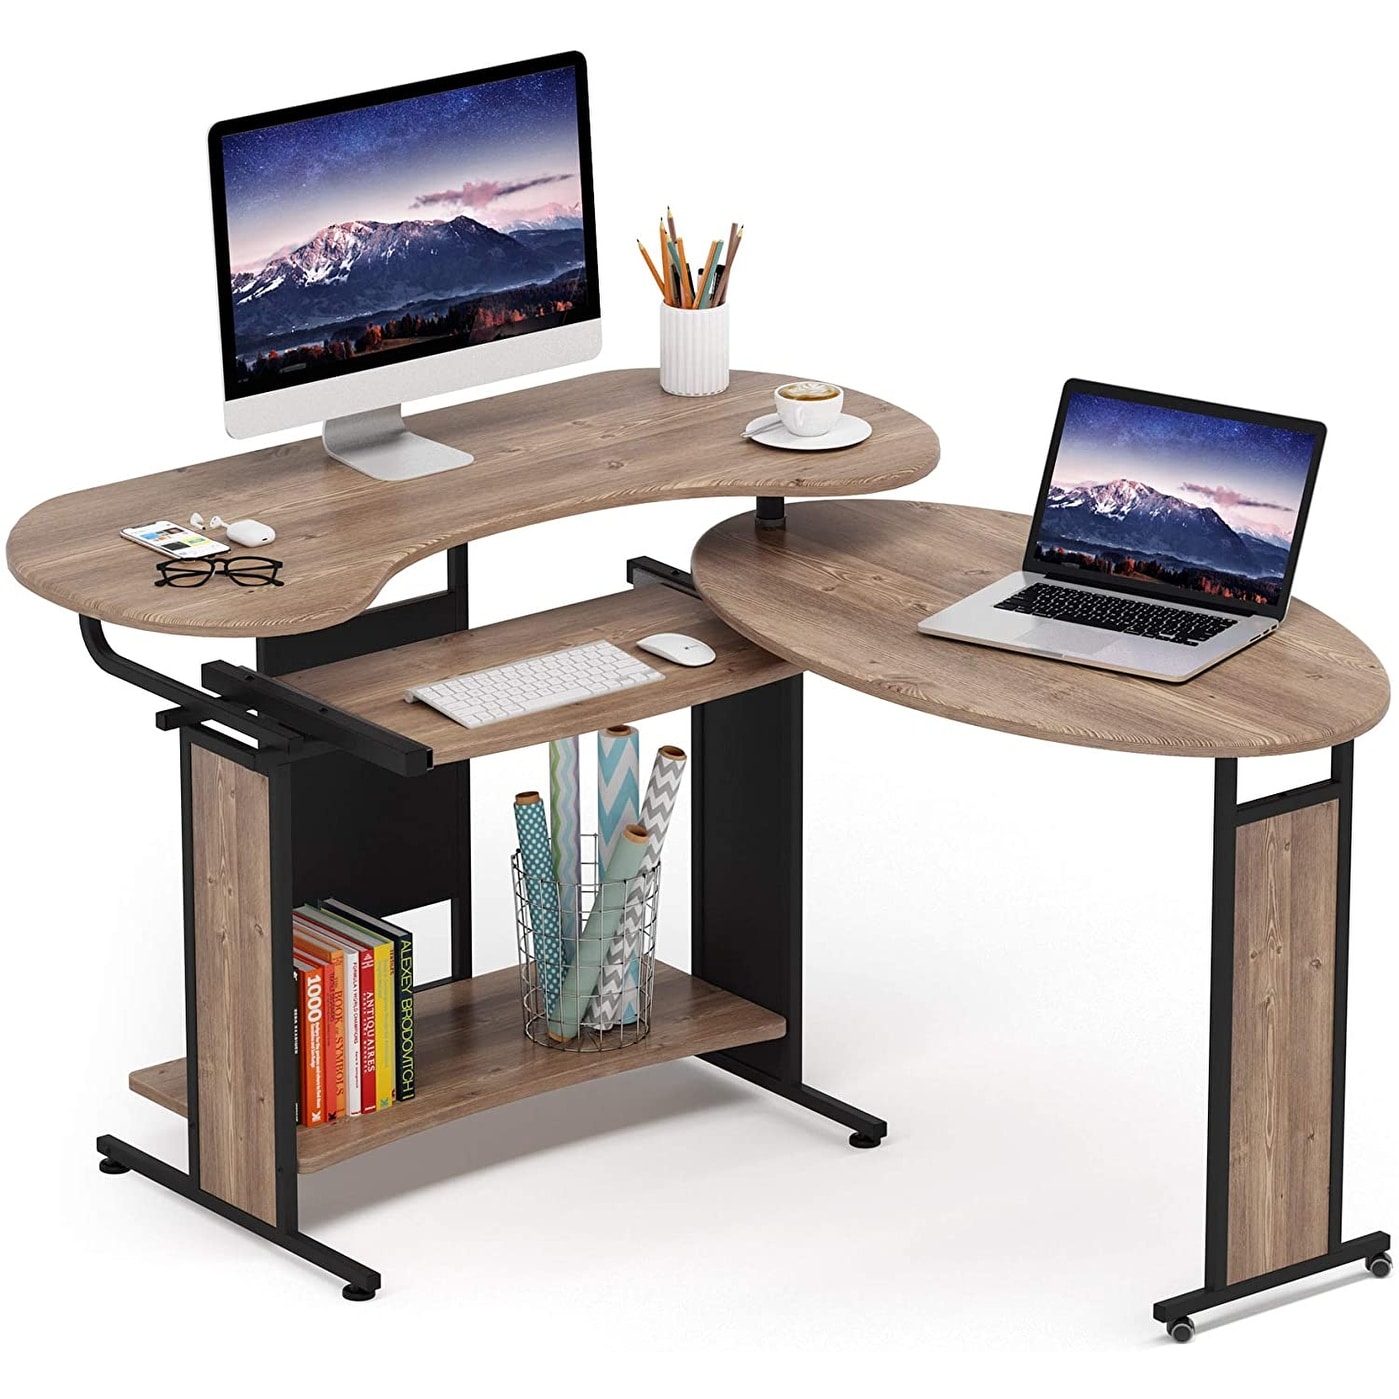 https://ak1.ostkcdn.com/images/products/is/images/direct/62b11e5e443336c32c66d06058a33c977cc49cd5/Reversible-L-Shaped-Computer-Desk%2C-Modern-Rotating-Office-Corner-Table.jpg